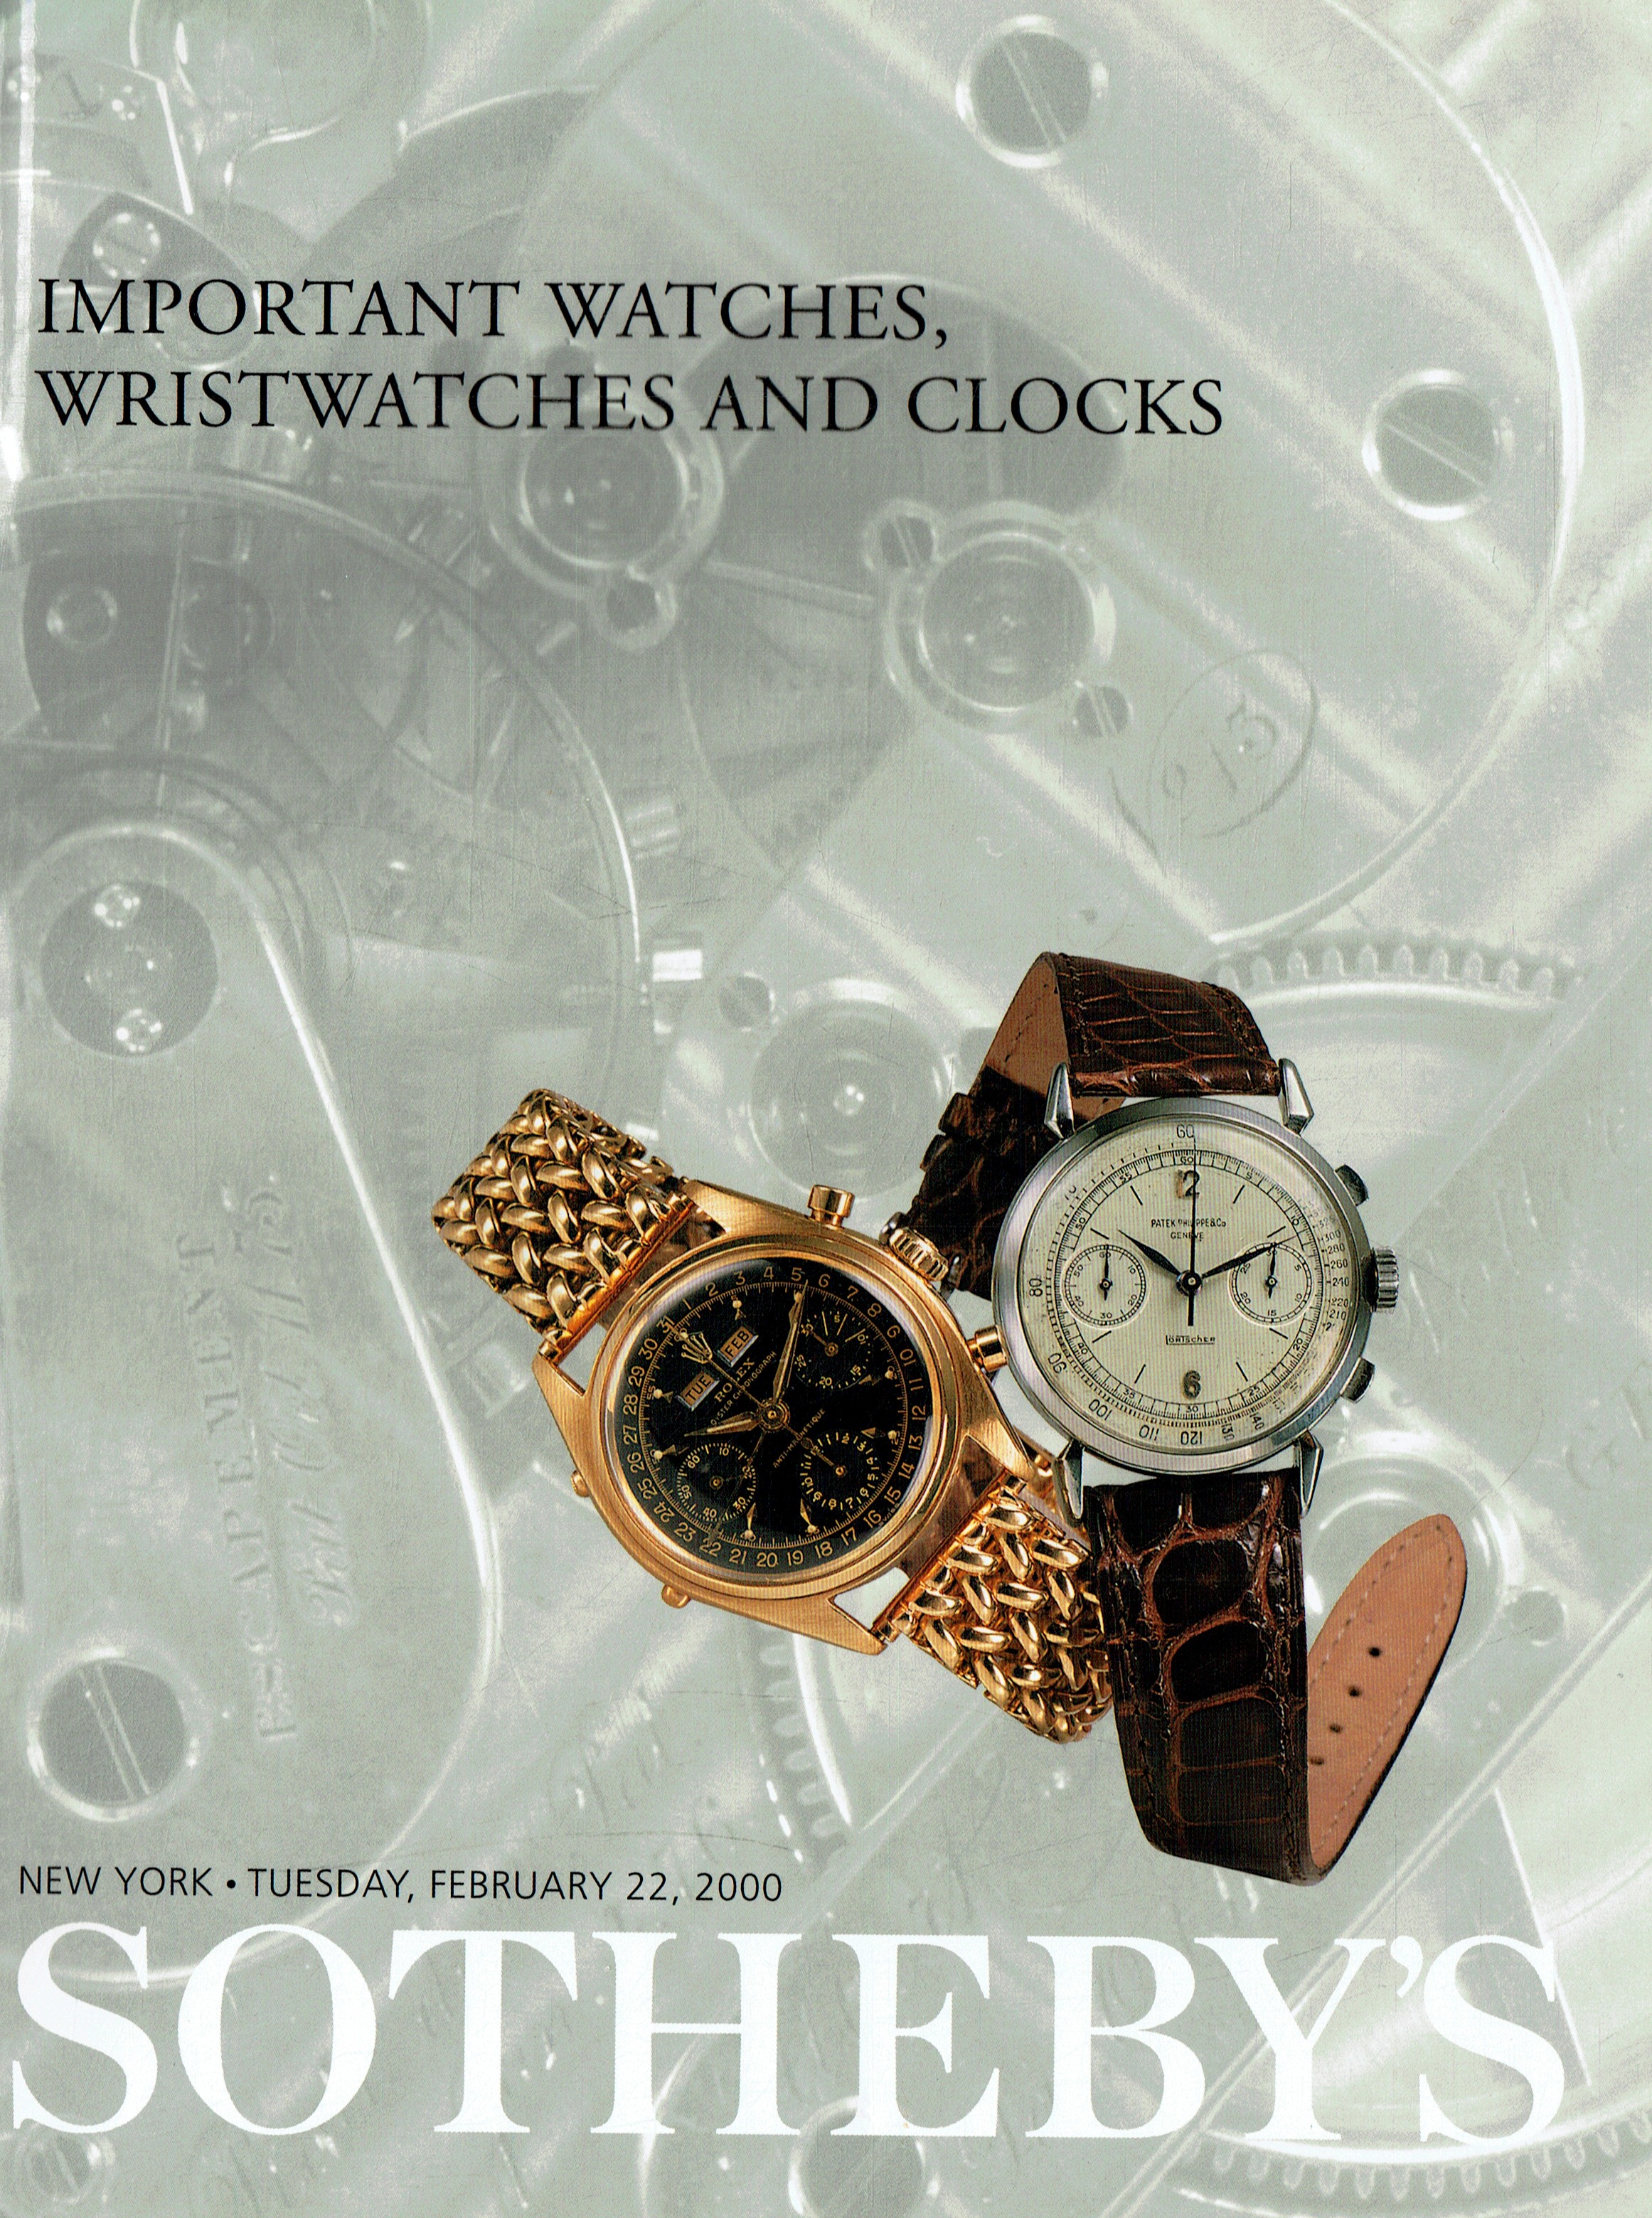 Sothebys February 2000 Important Watches, Wristwatches & Clocks (Digital Only)